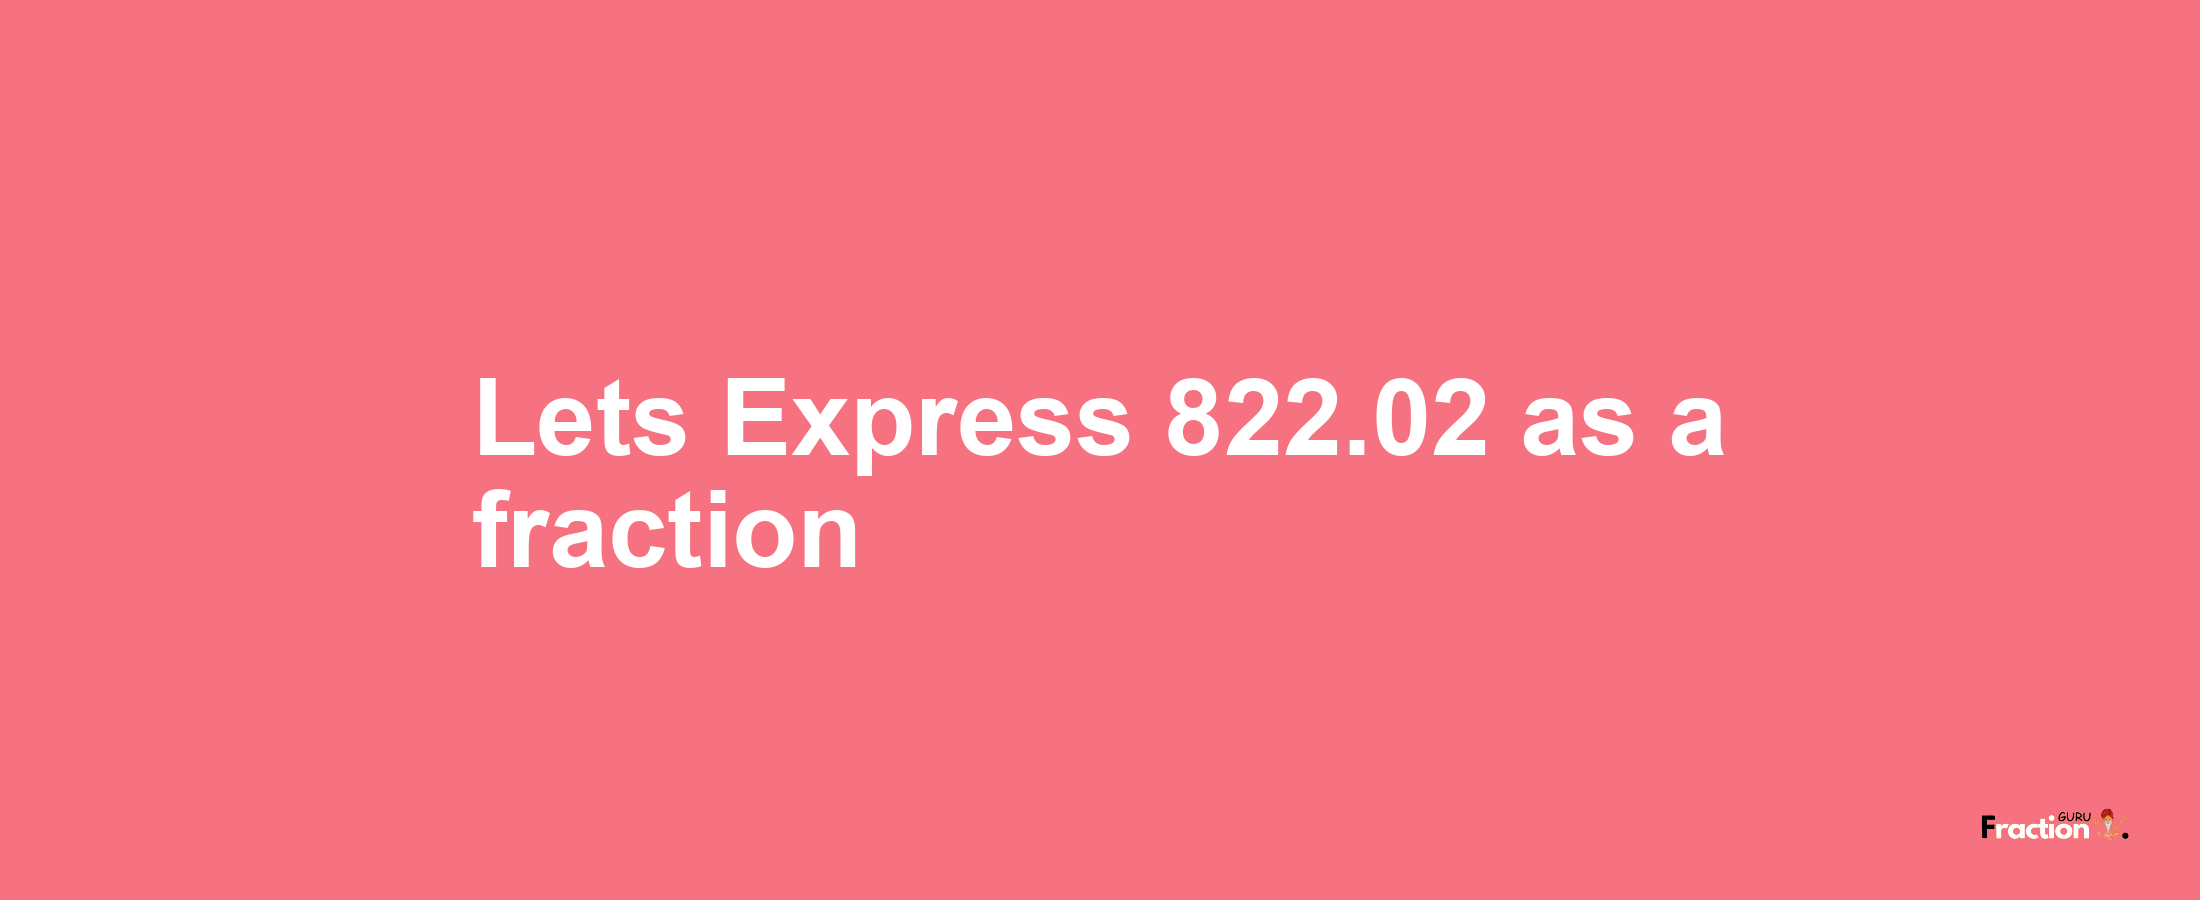 Lets Express 822.02 as afraction